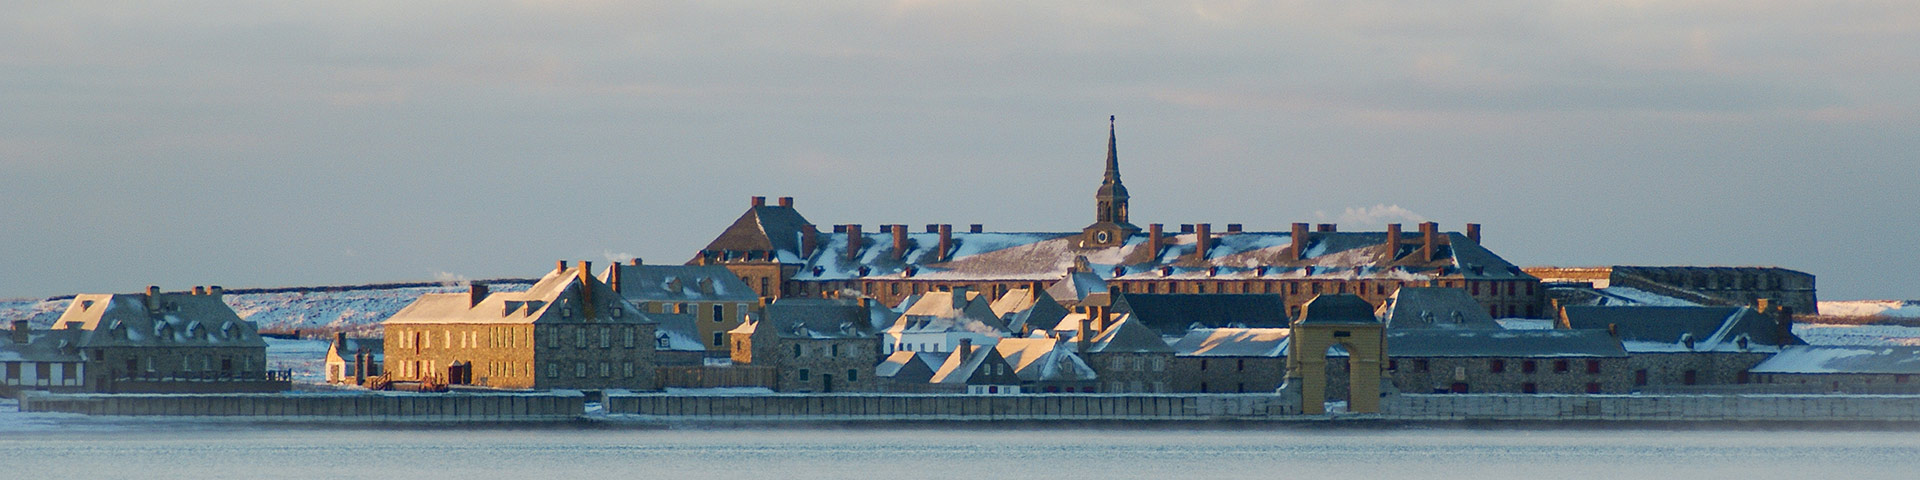 The reconstructed town of Louisbourg covered in snow